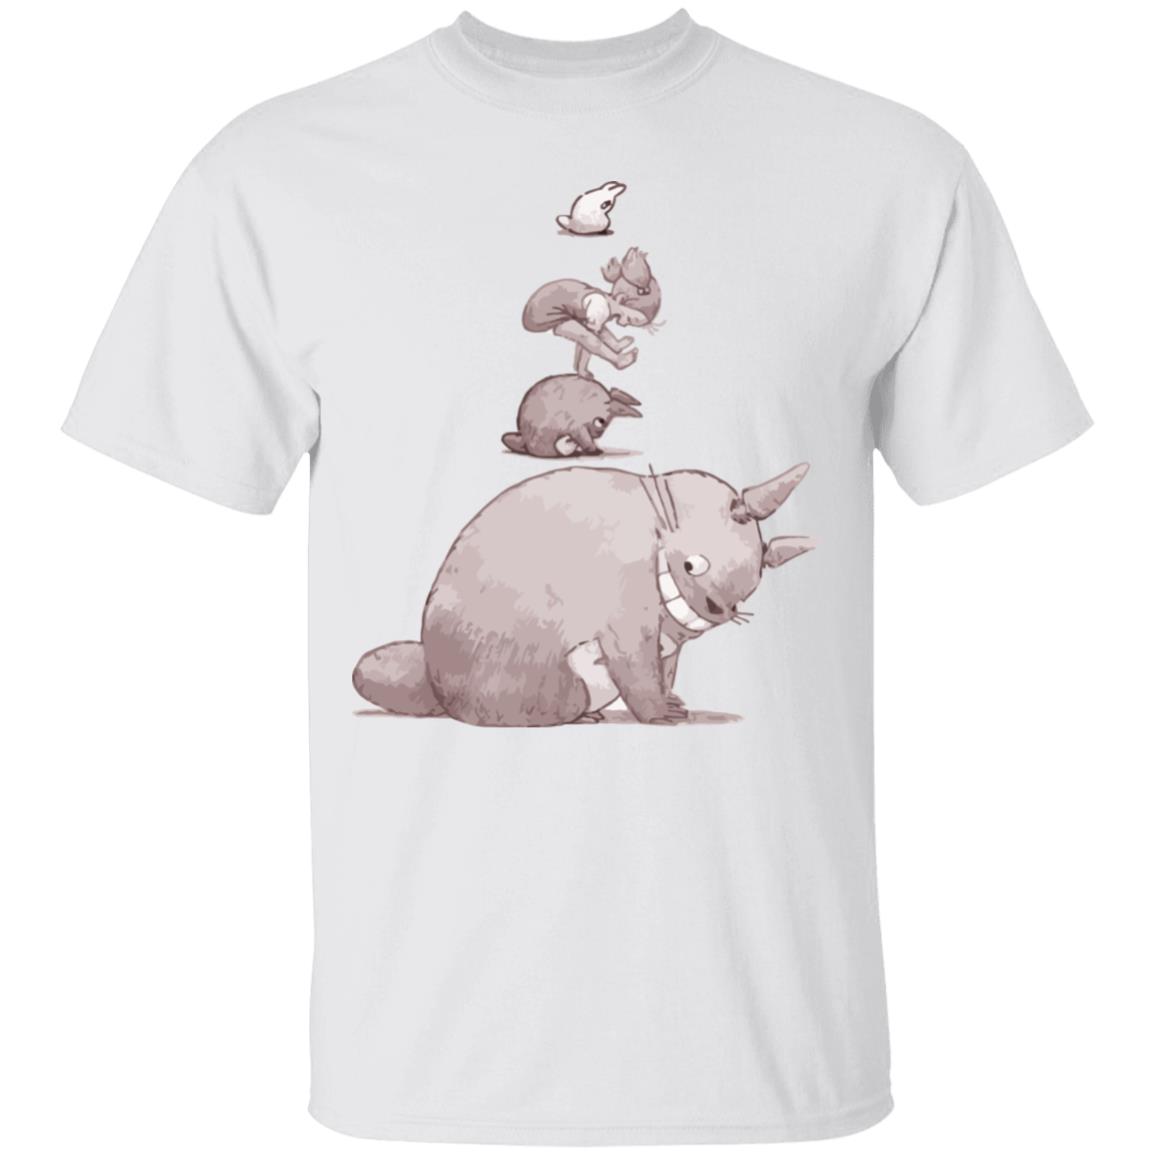 Totoro - Jump over the cow playing T Shirt - Ghibli Store